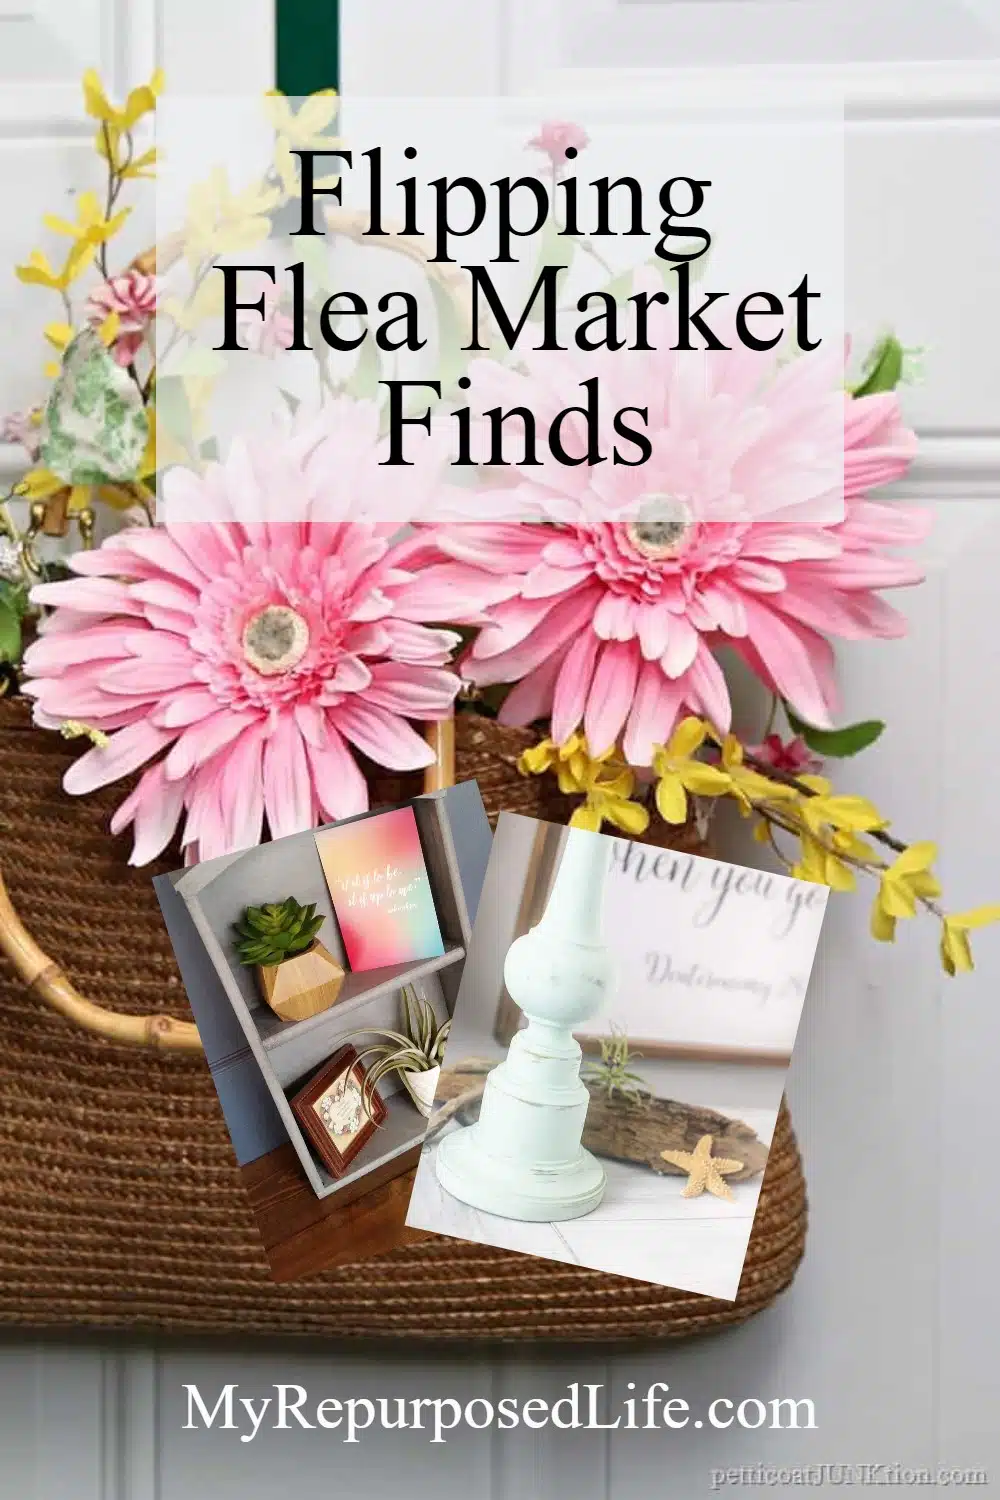 Flipping Flea Market Finds is fun, easy and frugal. Ideas for furniture, home decor and so much more. Easy ideas for completing makeovers in an afternoon. #MyRepurposedLife #fleamarketfinds #flipping via @repurposedlife